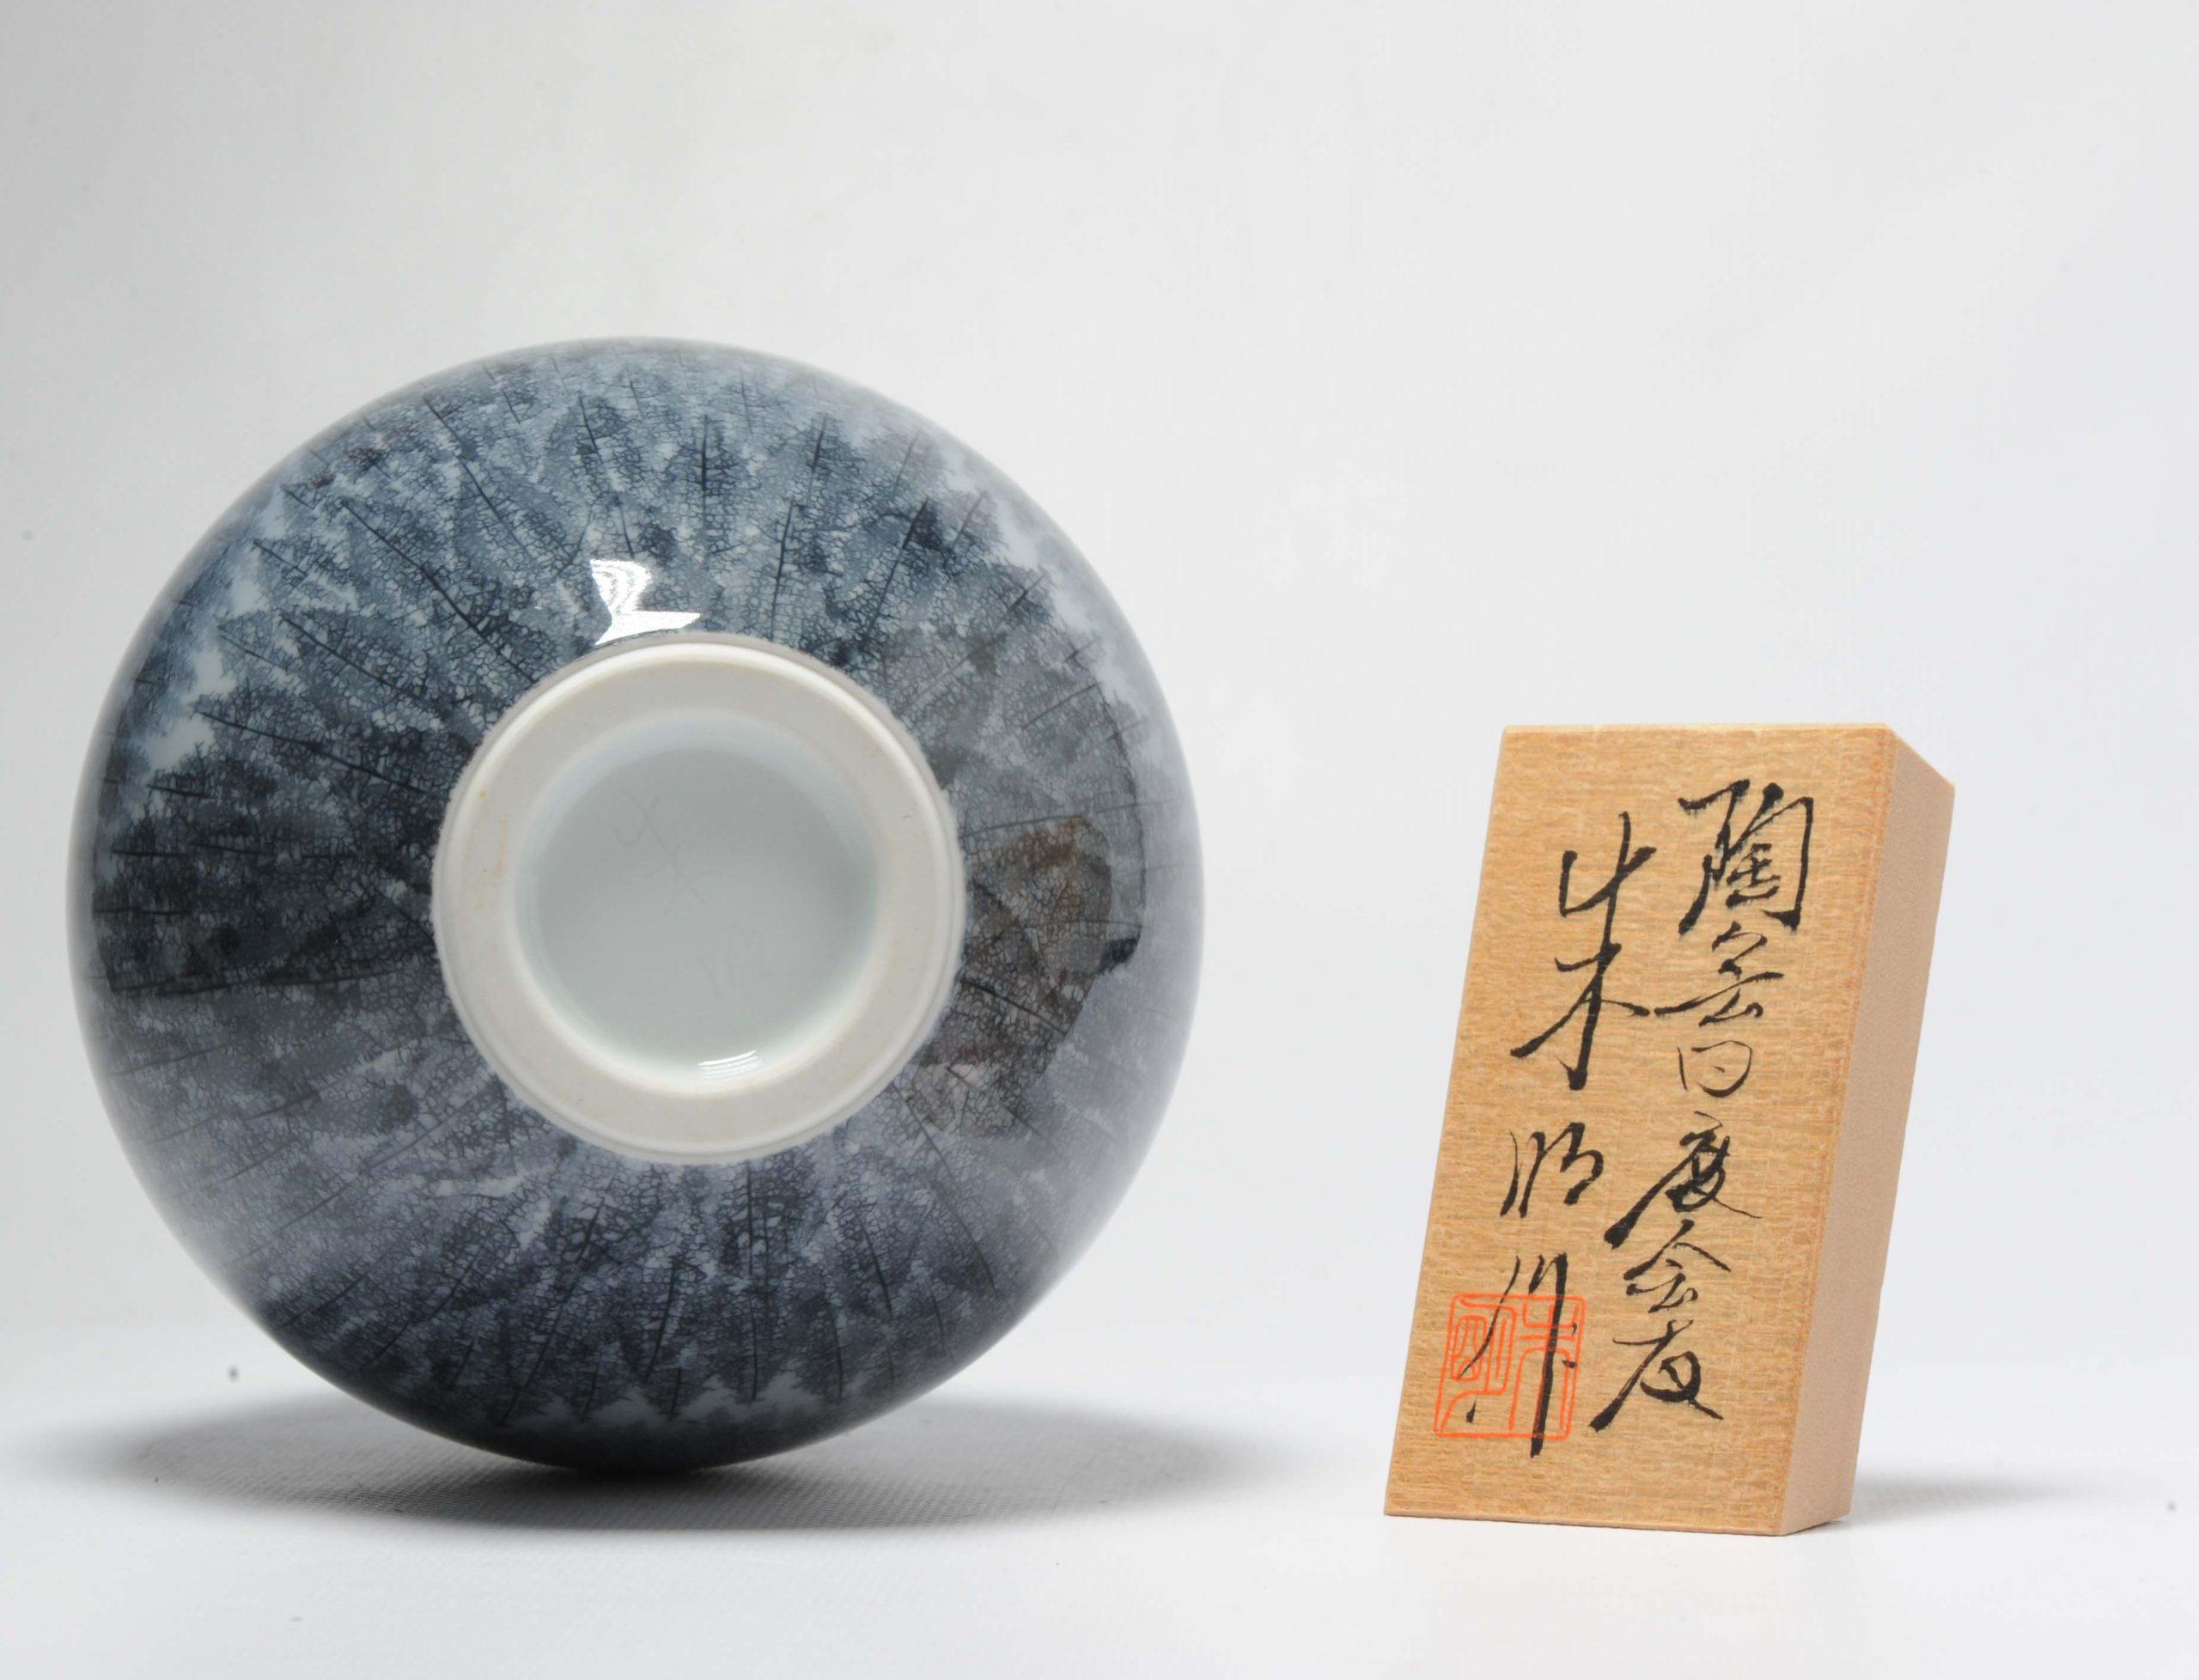 Lovely and rare piece with storage box.

A superb blue and white porcelain vase, with a winter landscape. Made by Fuji Shumei

Fujii Mr. Aki Fujii's specialty is the technique of drawing a mountain by simulating the veins of a leaf, called the “leaf